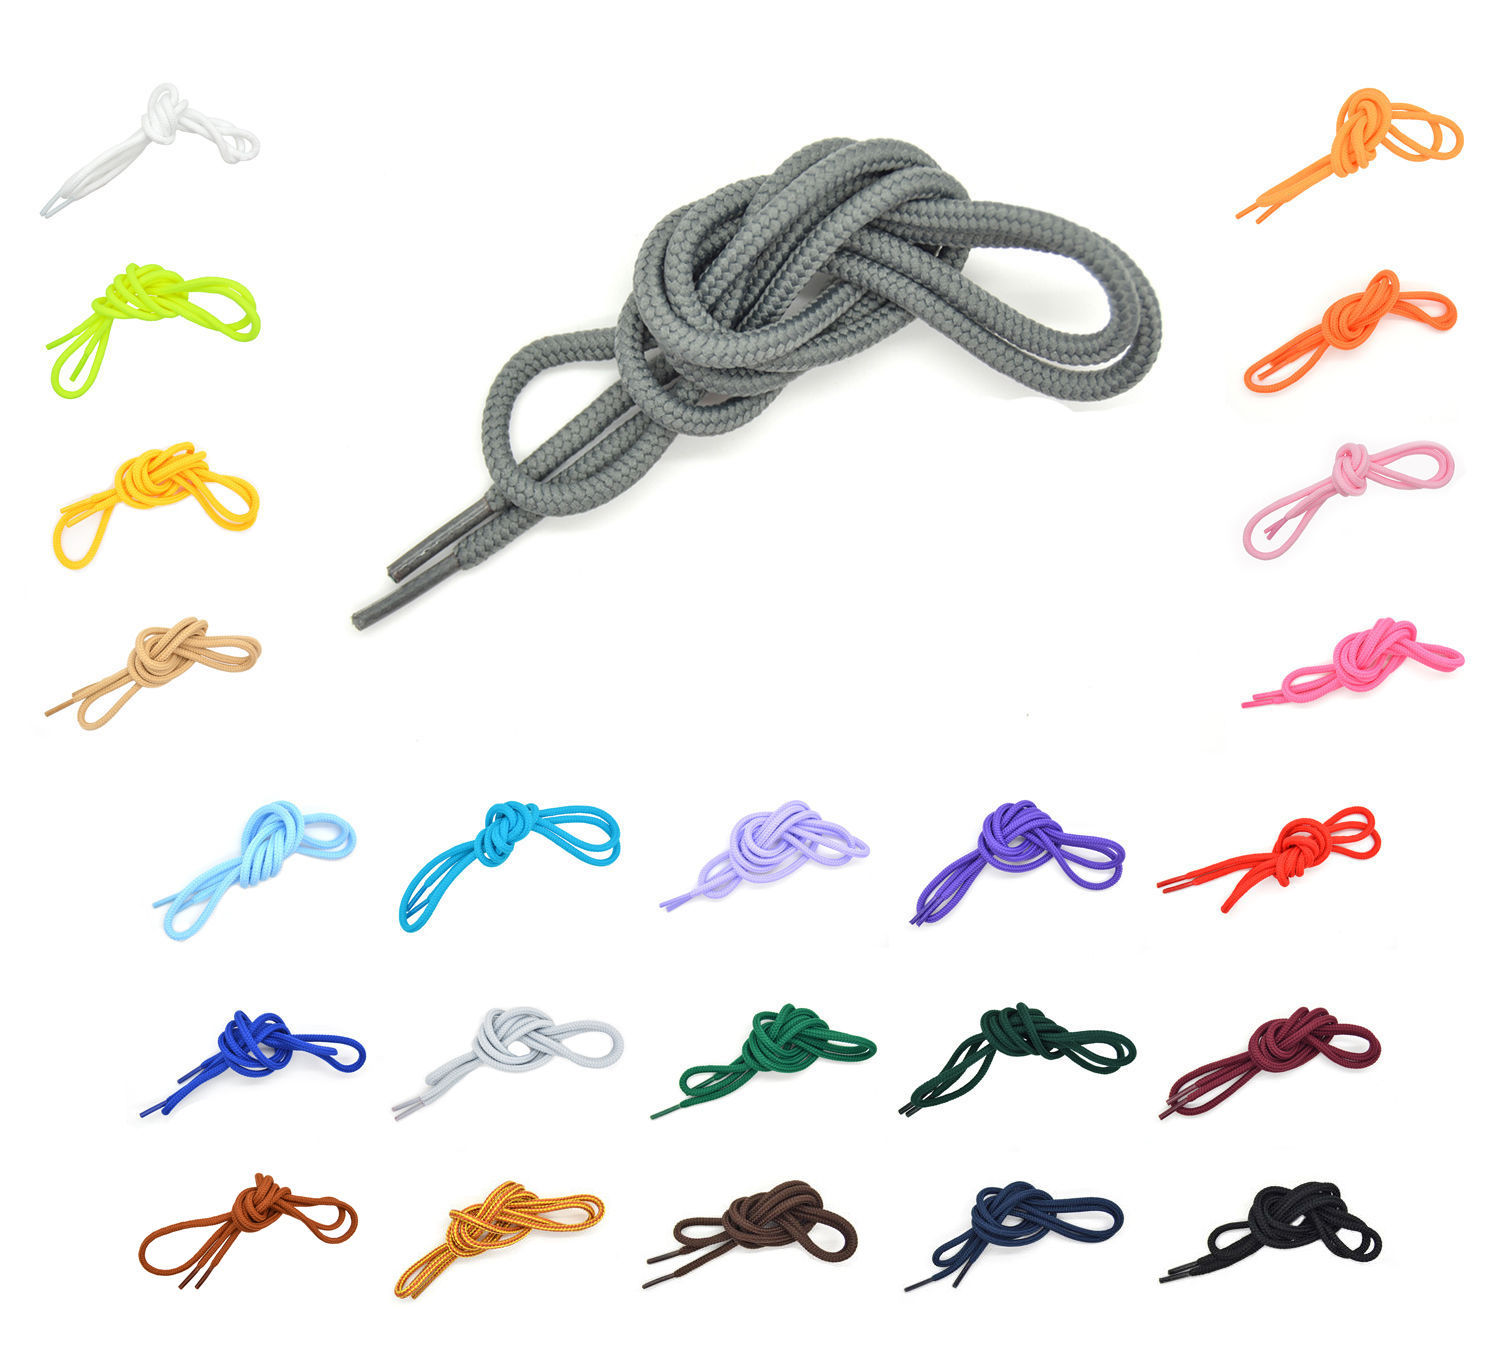 2 Pairs Round Shoelace Athletic Sneakers Strings Shoelaces 27",36",45",54" - $6.43 - $6.92